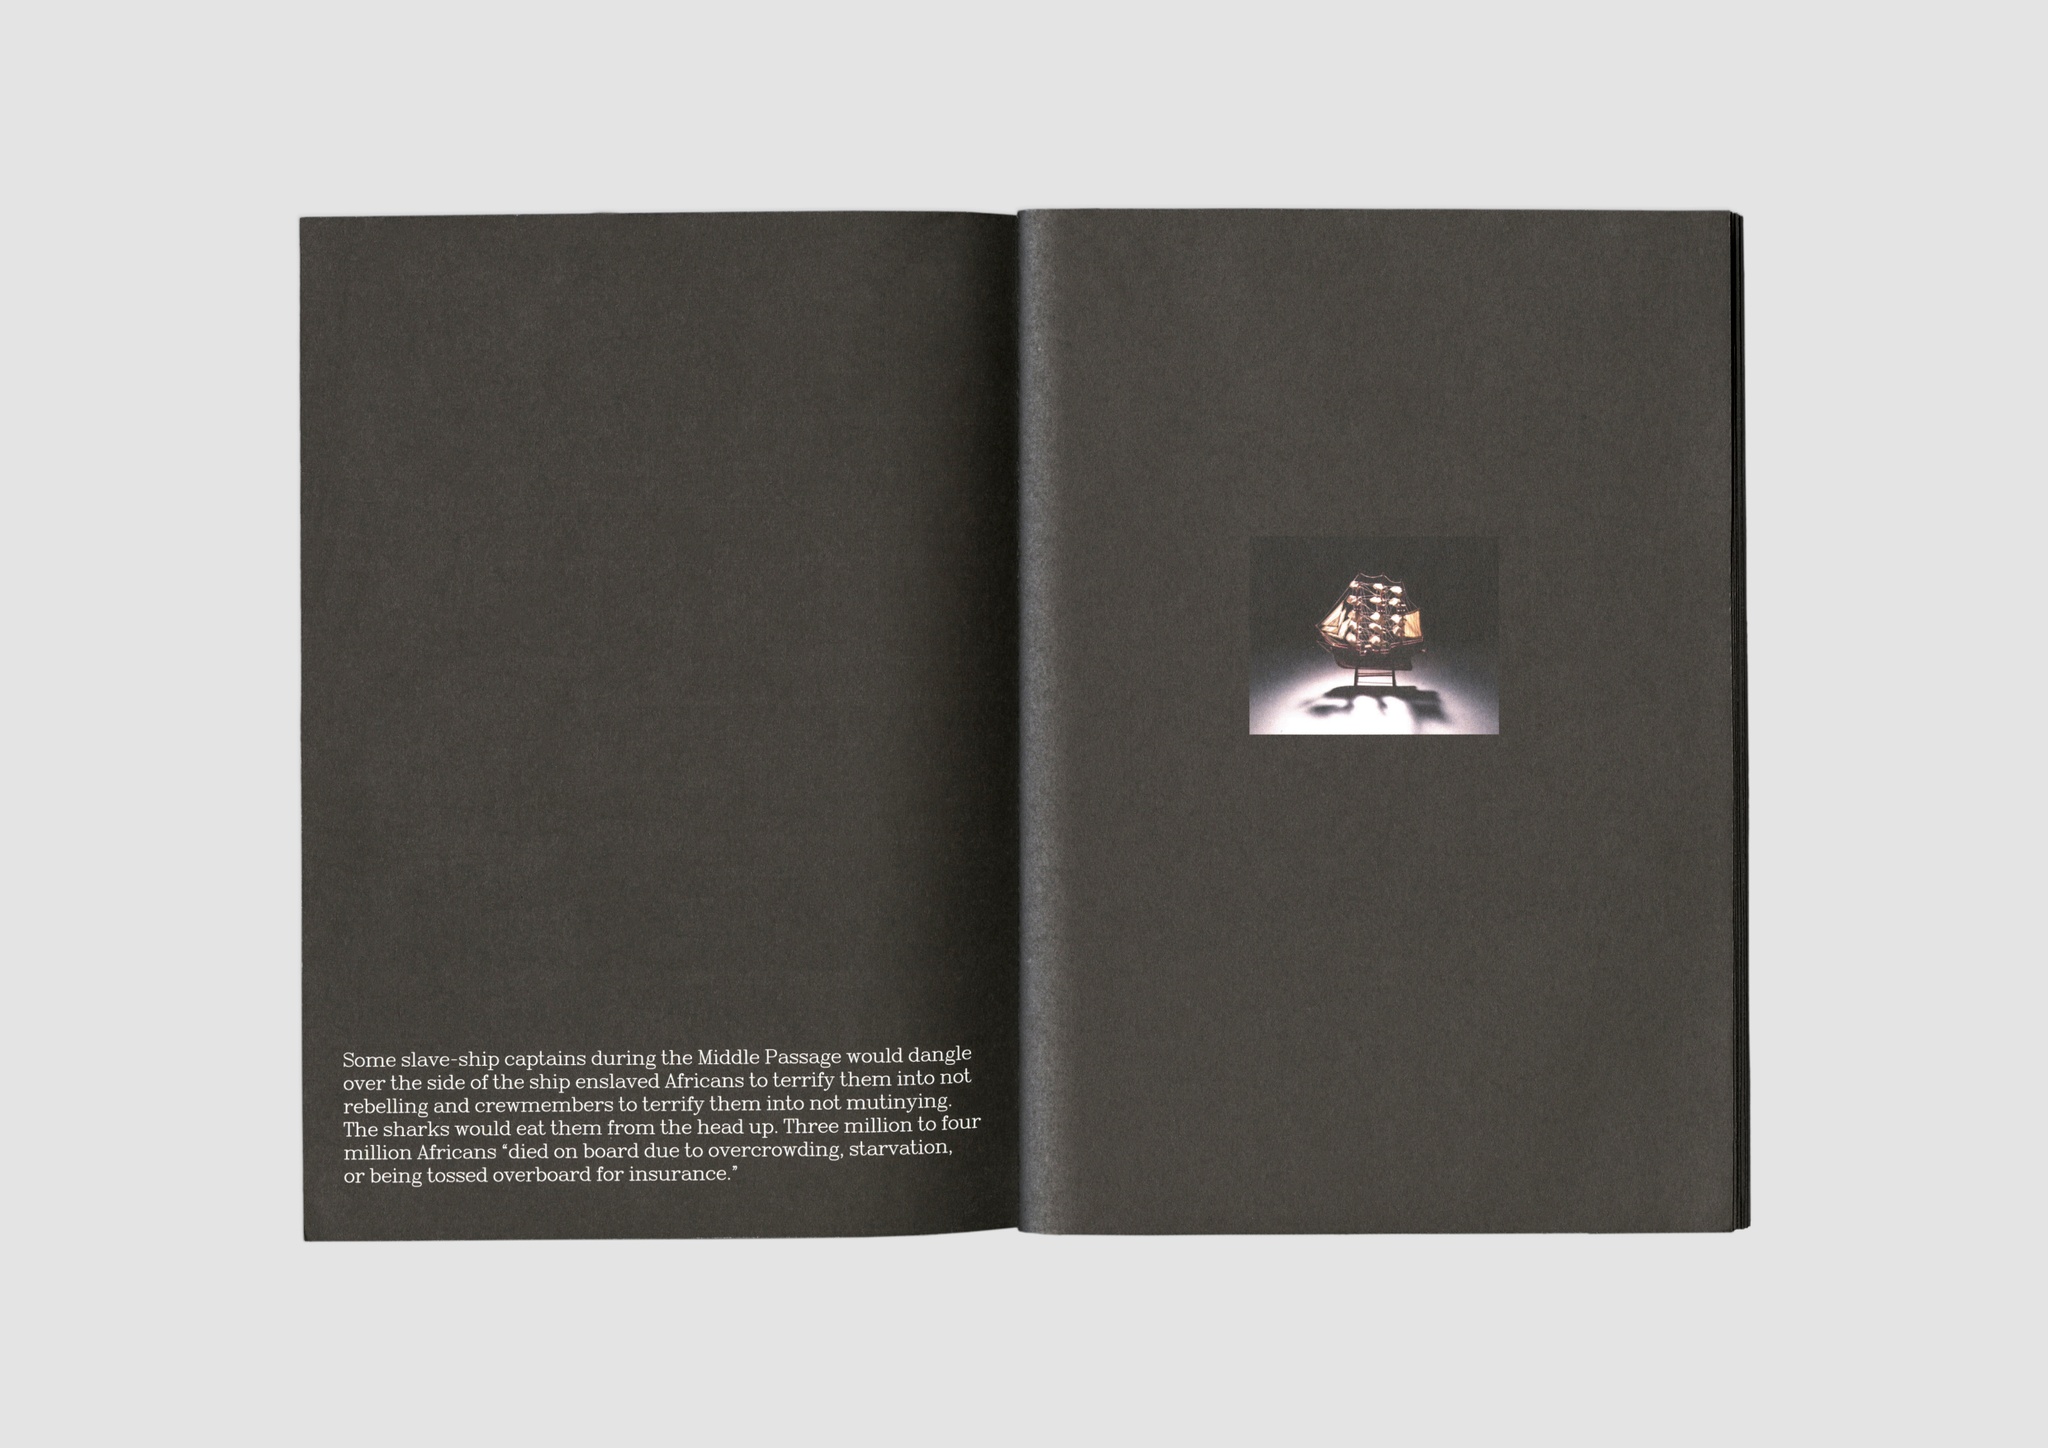 A spread of the catalogue "Howardena Pindell: Rope/Fire/Water" with black pages. On the left is several rows of text at the bottom of the page. On the right is a small square image of a 18th-century ship at the center of the page. 